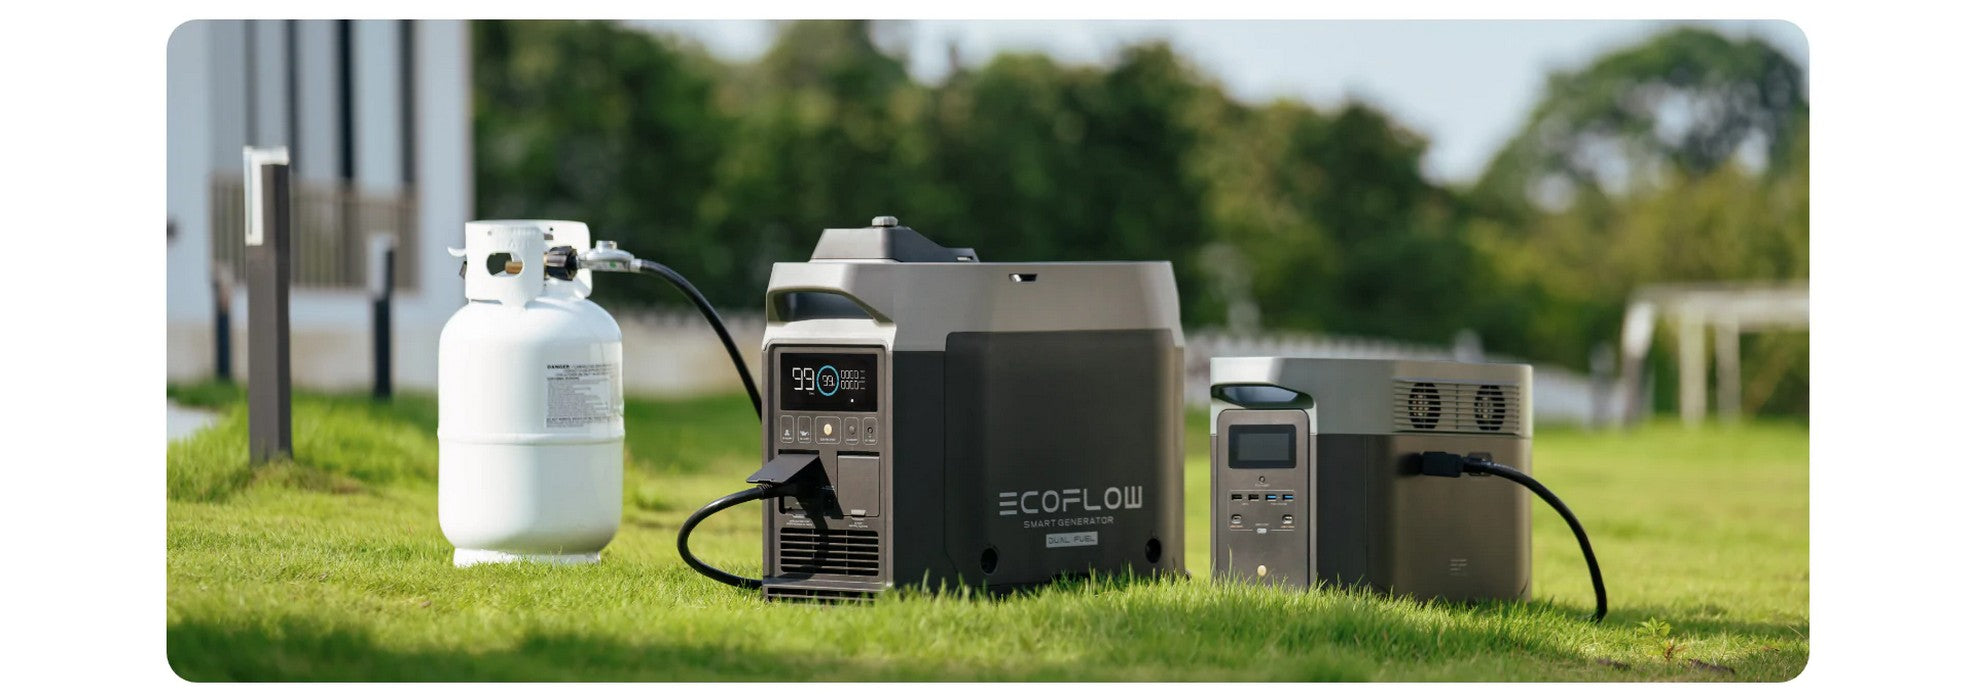 EcoFlow Delta Pro Portable Power Station and Dual Fuel Smart Generator Kit  - Free Remote Control!